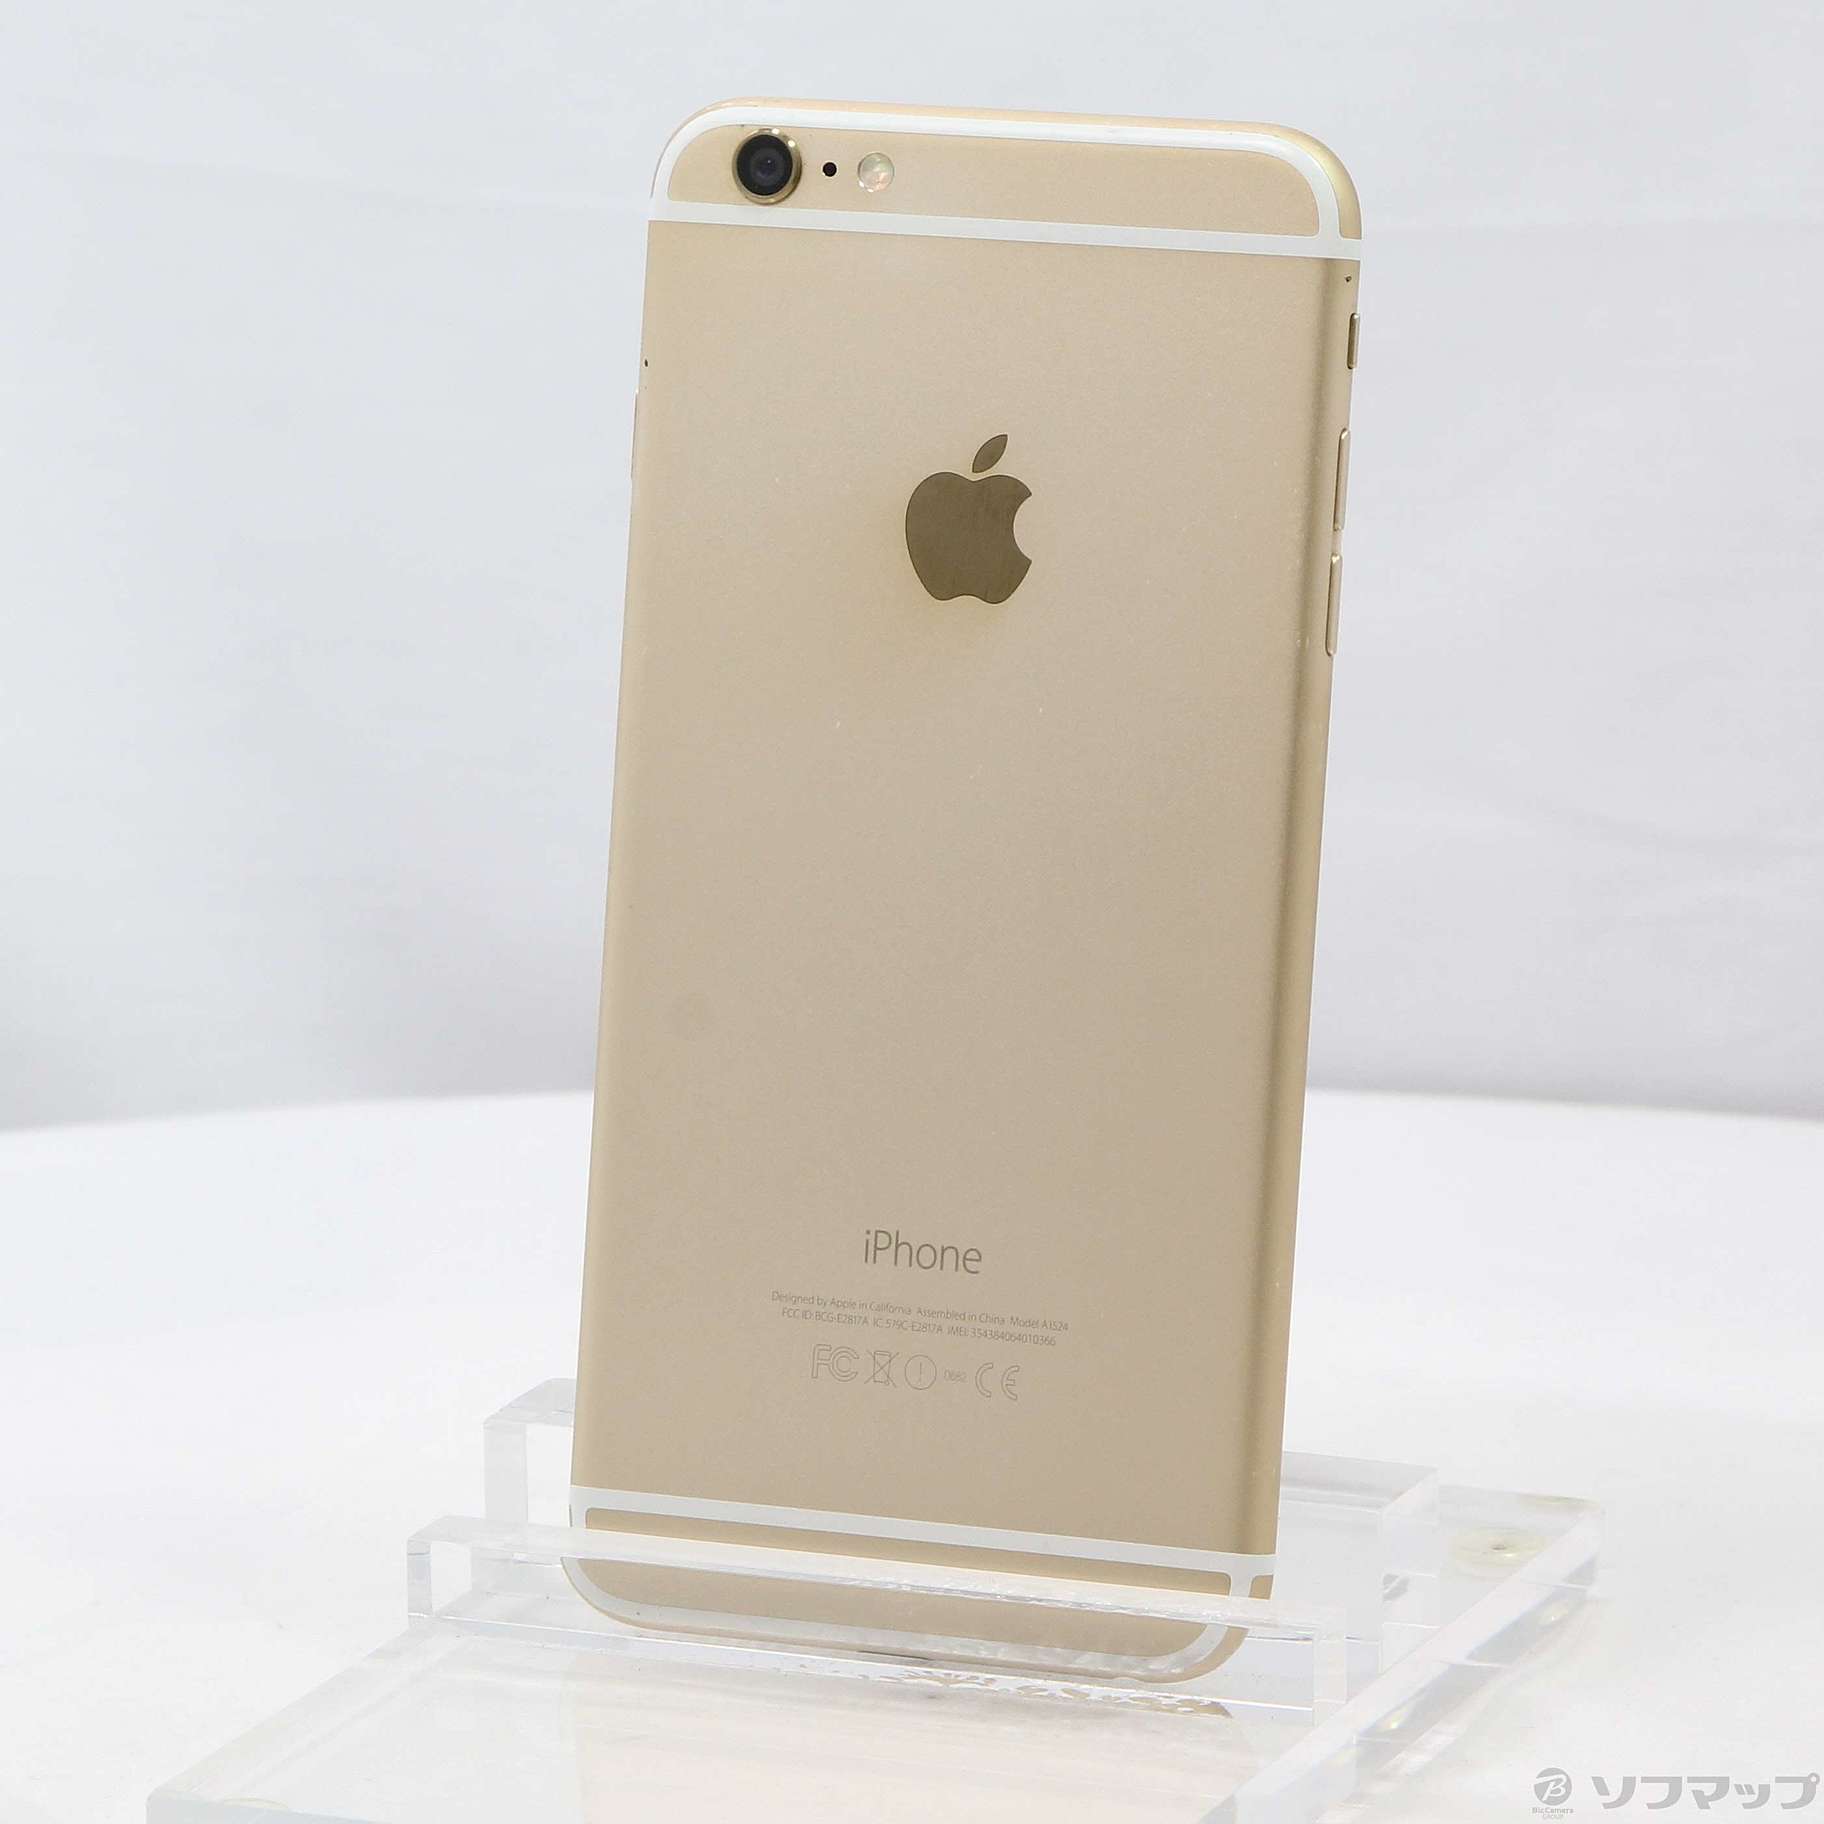 iPhone 6 Gold 16 GB その他